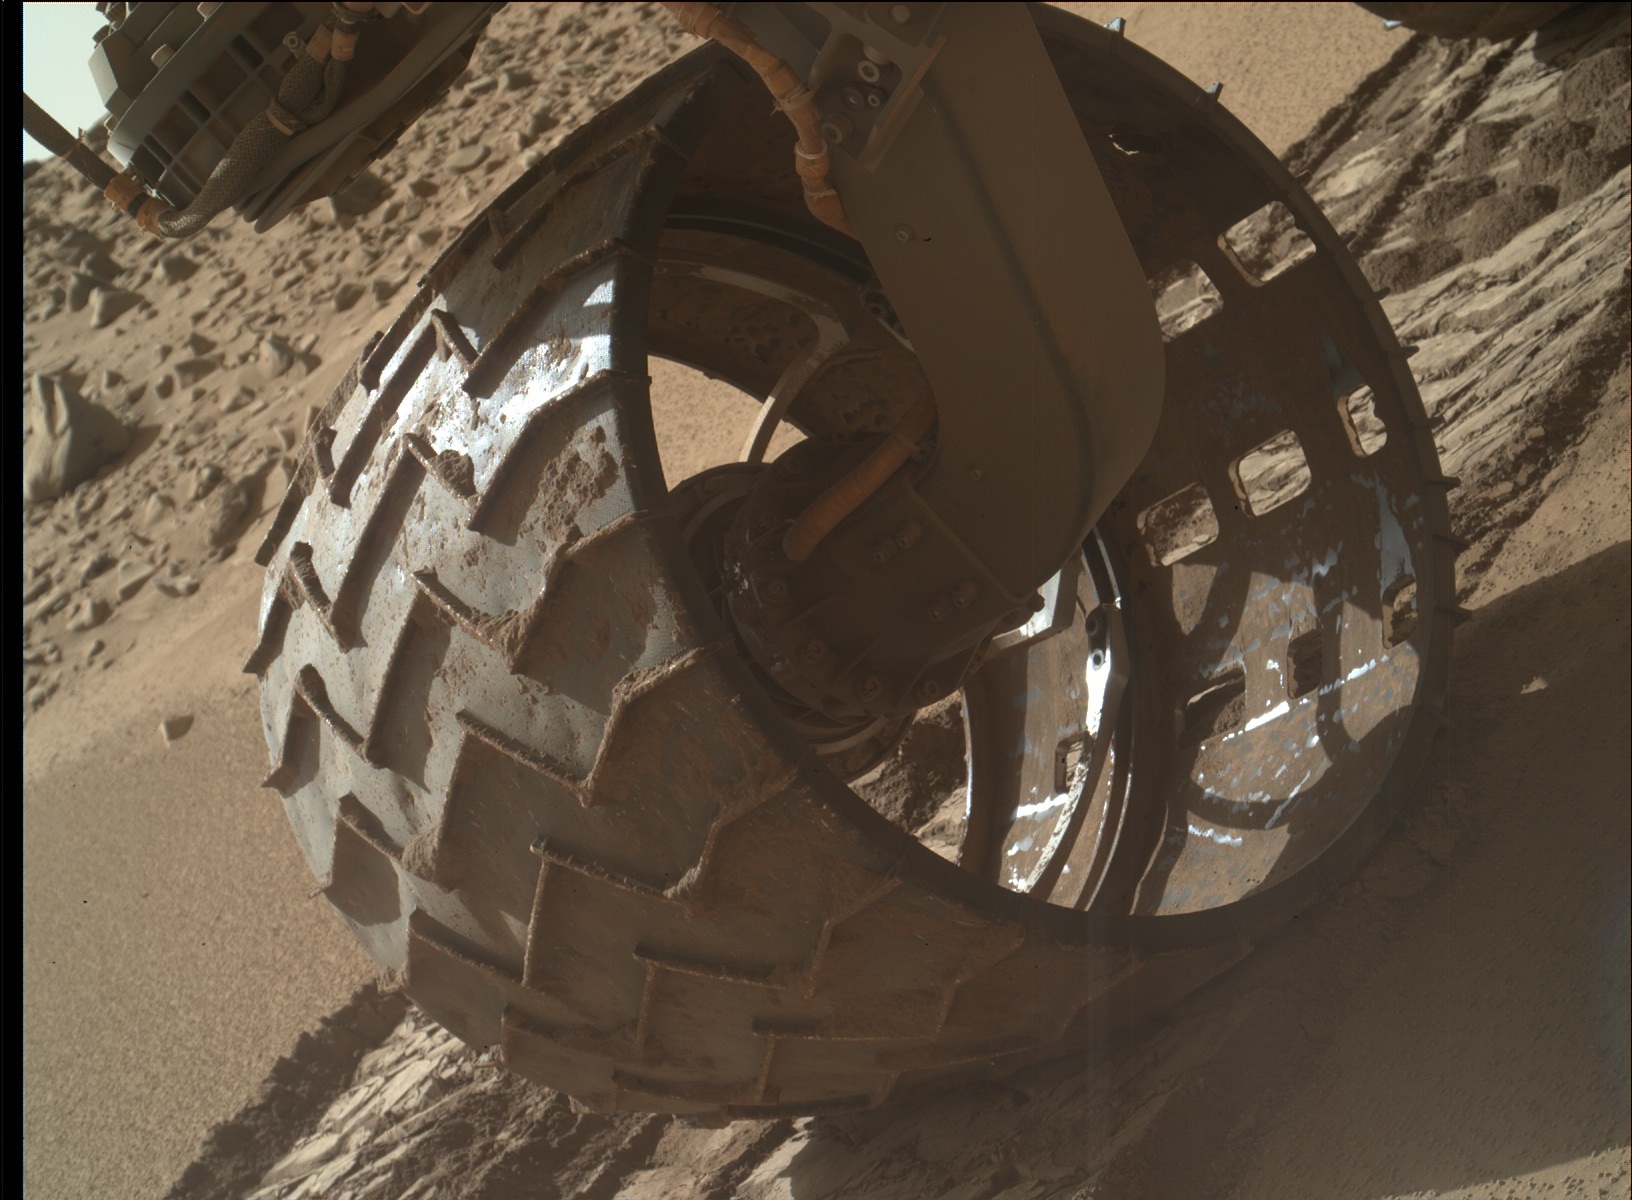 Nasa's Mars rover Curiosity acquired this image using its Mars Hand Lens Imager (MAHLI) on Sol 532, at drive 208, site number 26